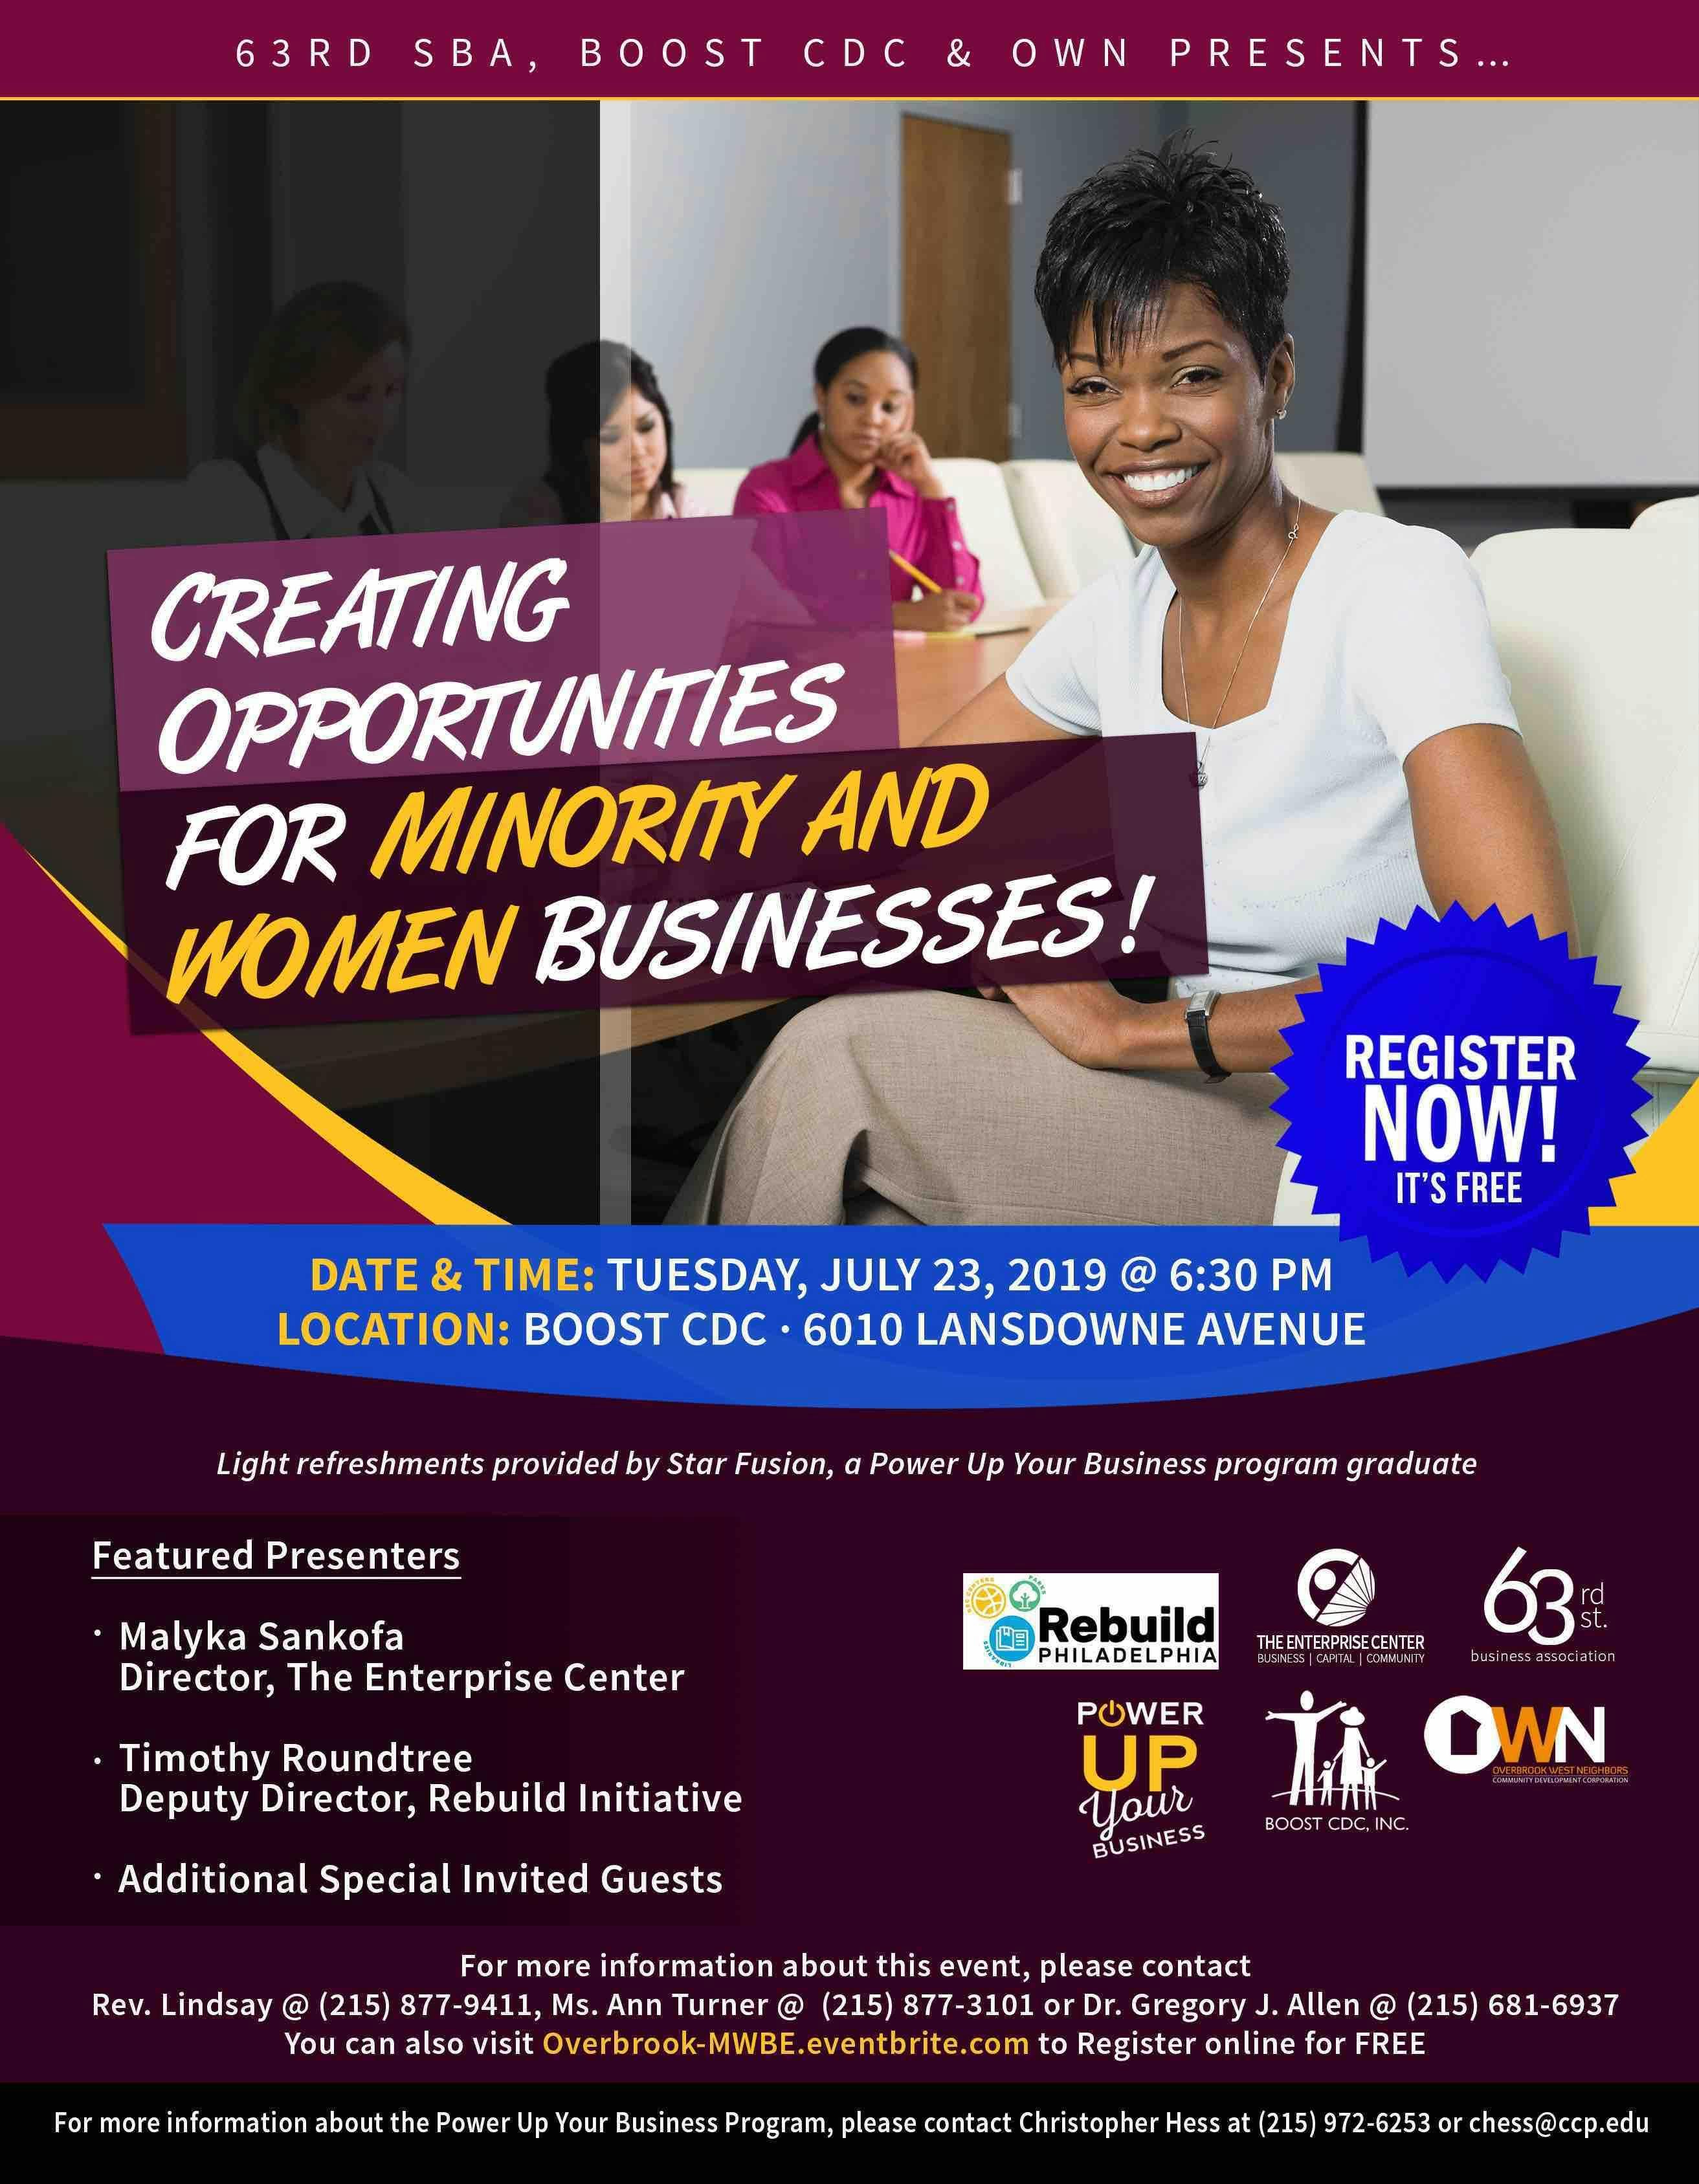 Creating Opportunities for Minority and Women Businesses